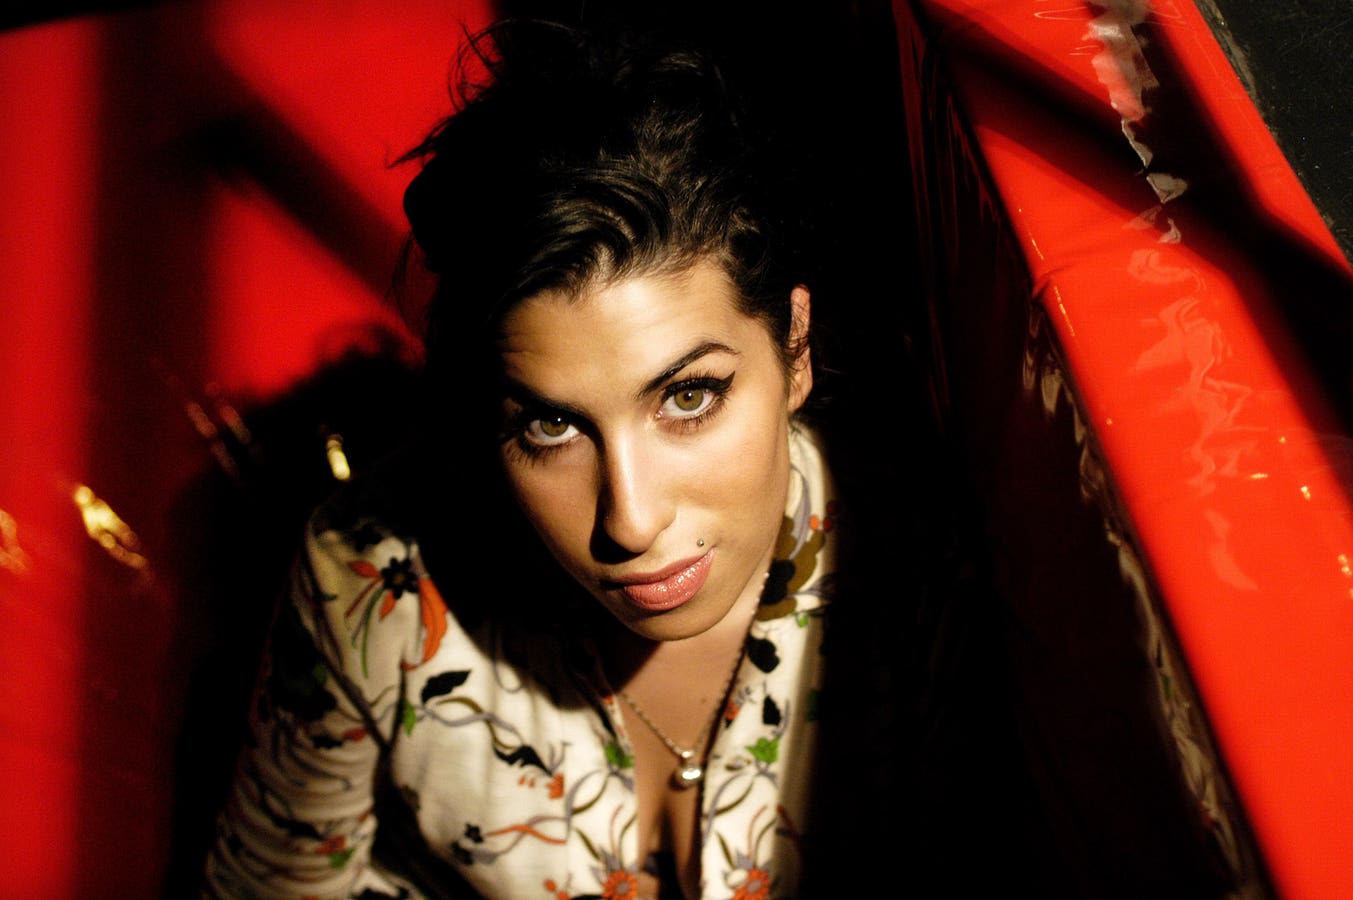 Amy Winehouse Hits A New Peak With One Of Her Biggest Songs